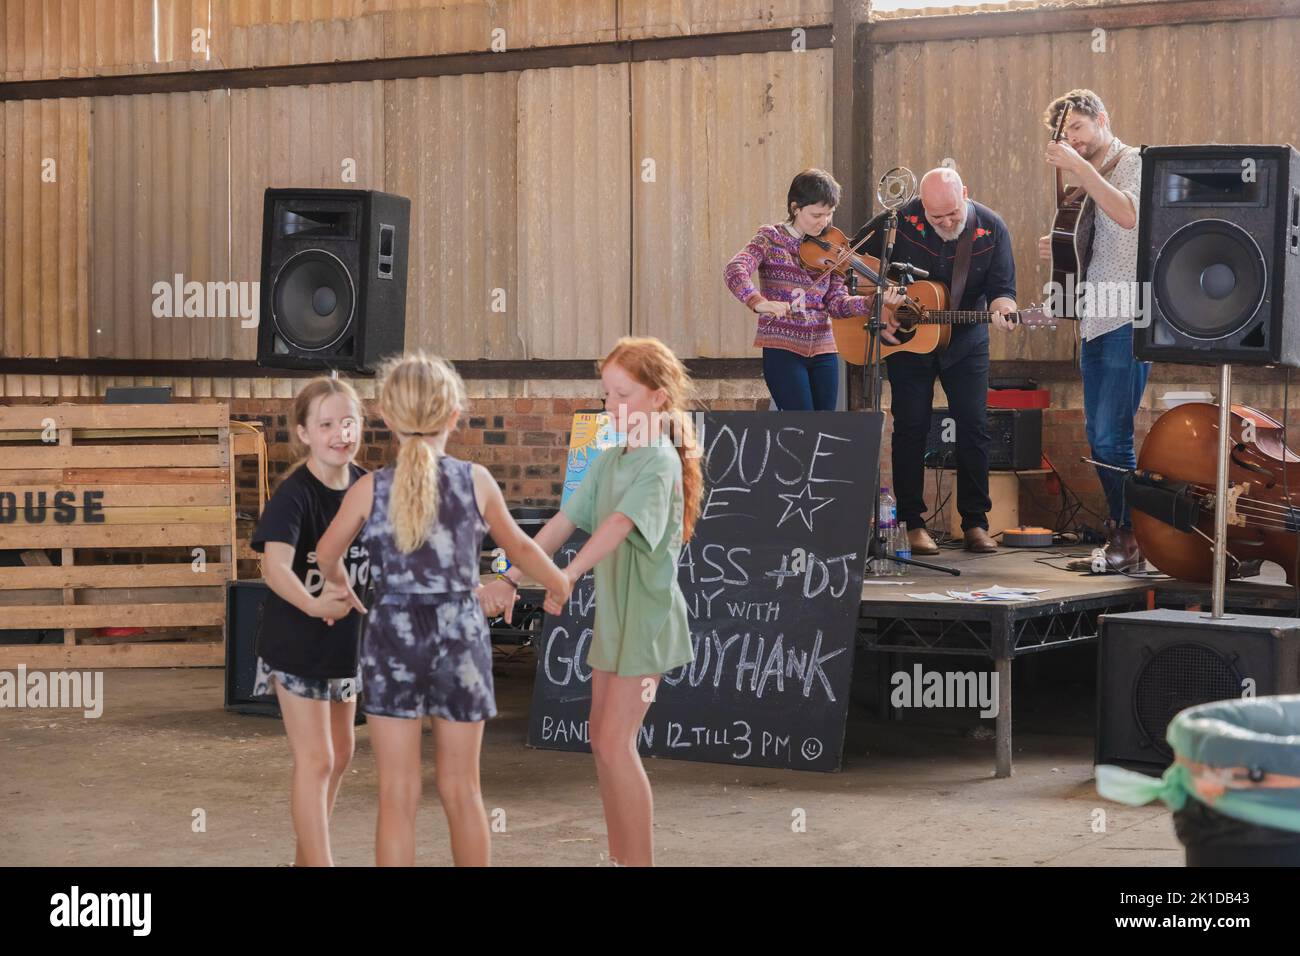 East Neuk, UK - August 14, 2022: Children dance and locals enjoy a live band performing country folk music in a barn at Bowhouse Farmer's Market in Ea Stock Photo